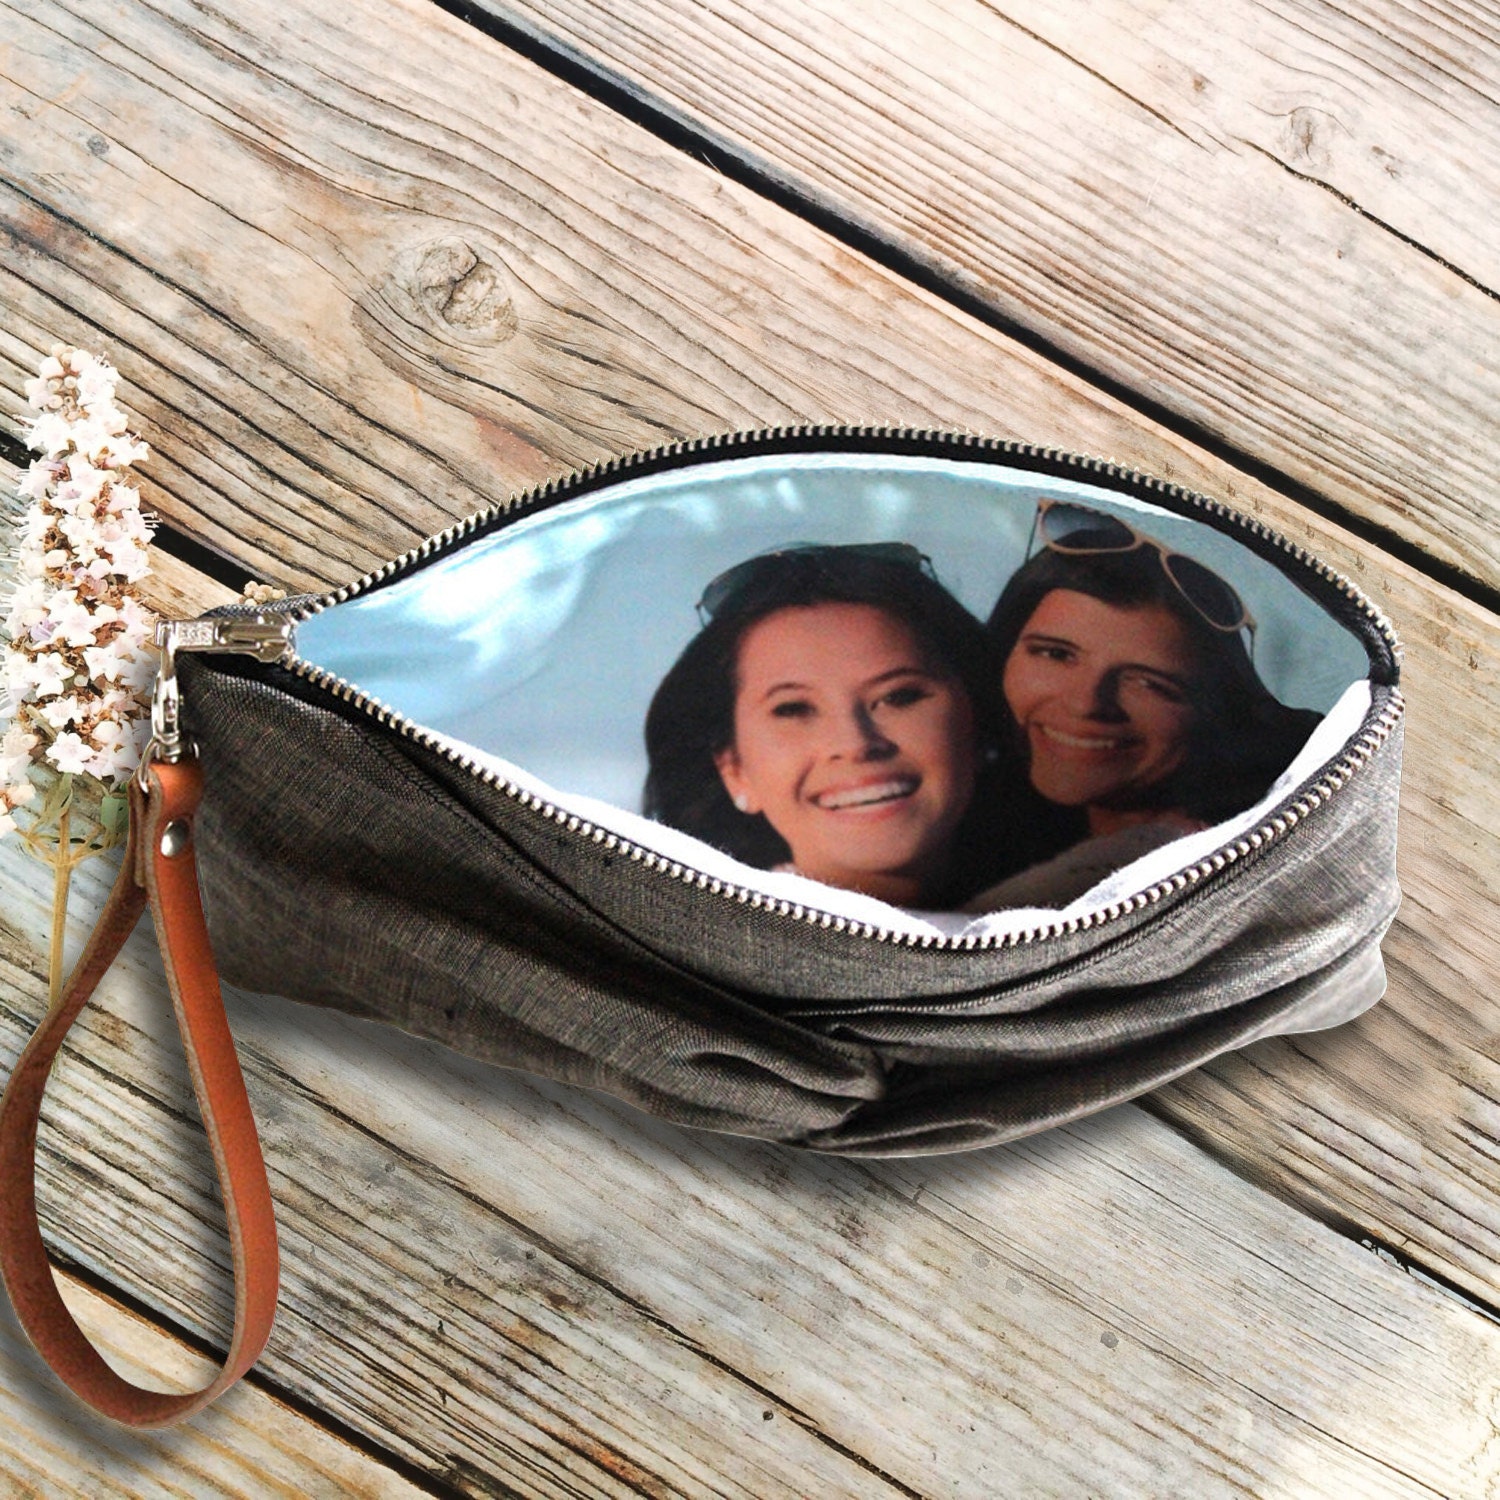 Knotted Clutch Photo Gift for Her Personalized by BananaCottage